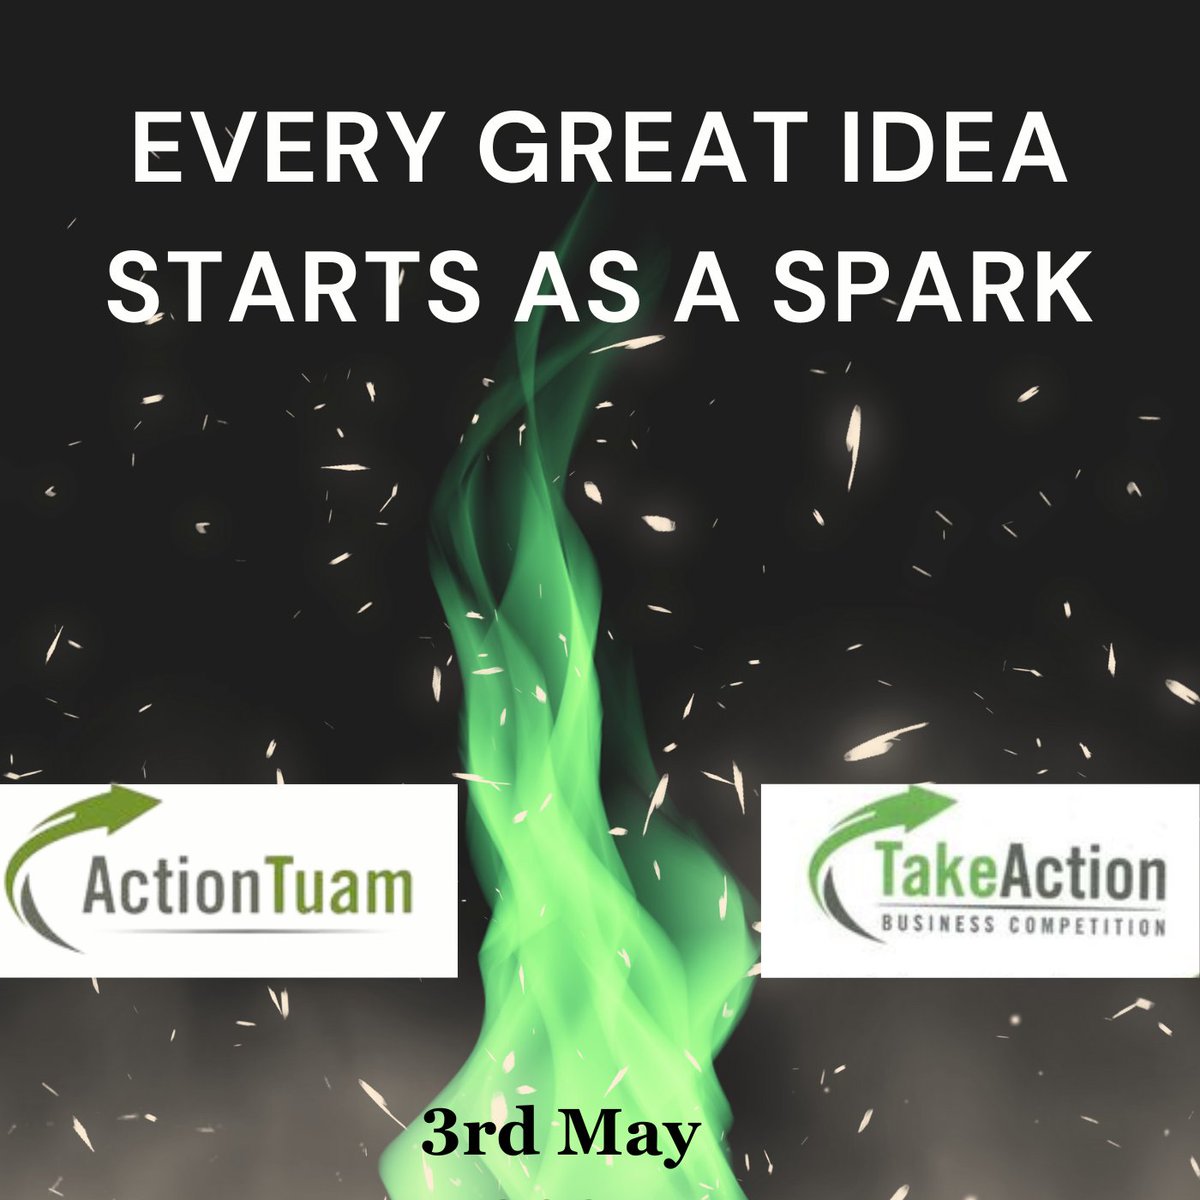 Take Action Business Competition on 3rd May 2024. email info@actiontuam.com for more information and an application form. Closing date 12th April 2024. #actiontuam #takeaction